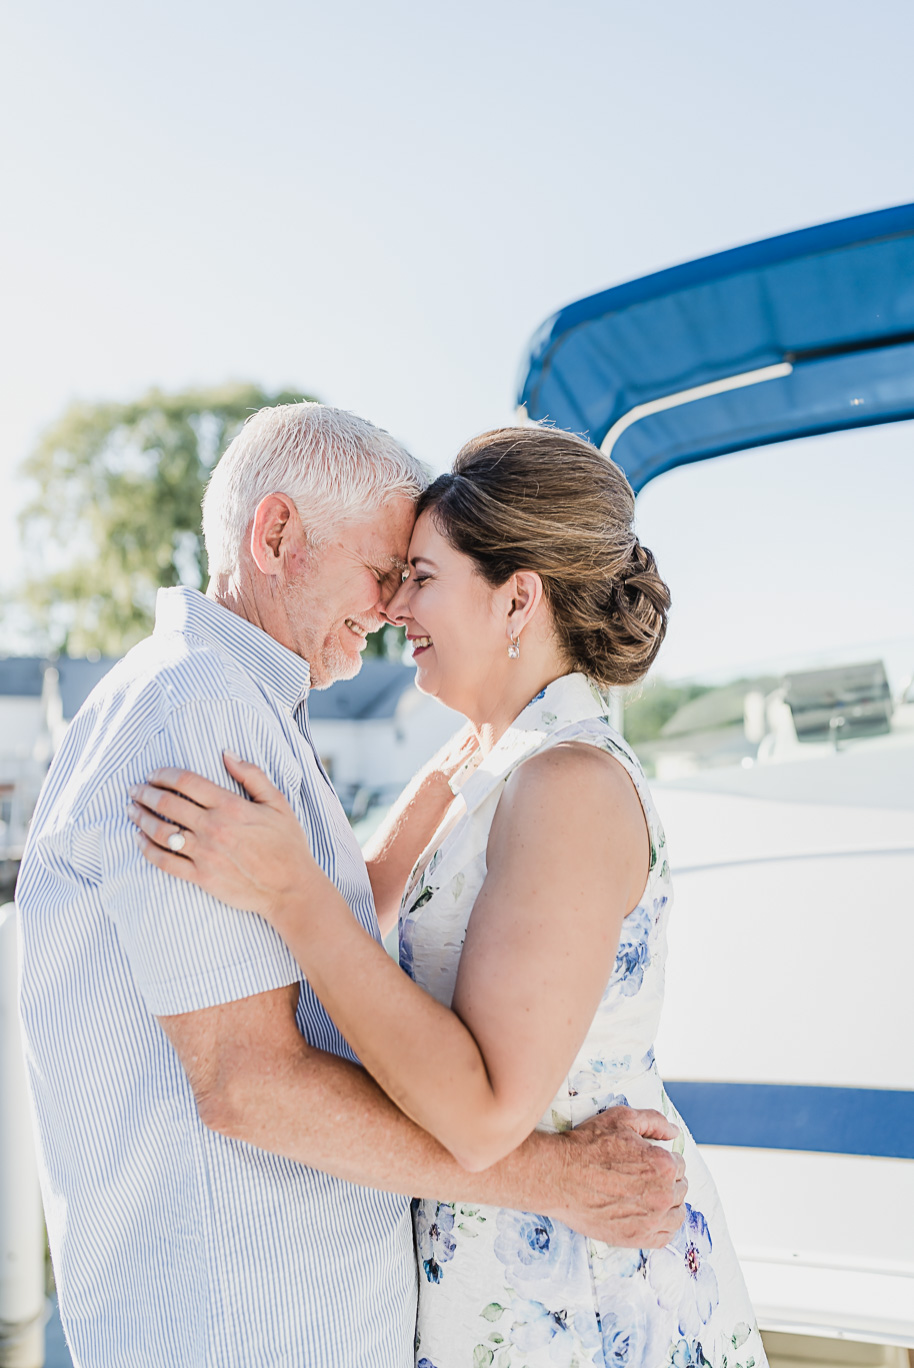 New Baltimore engagement session on a boat at the marina under the michigan summer setting sun provided by Kari Dawson, top-rated Metro Detroit wedding photographer.